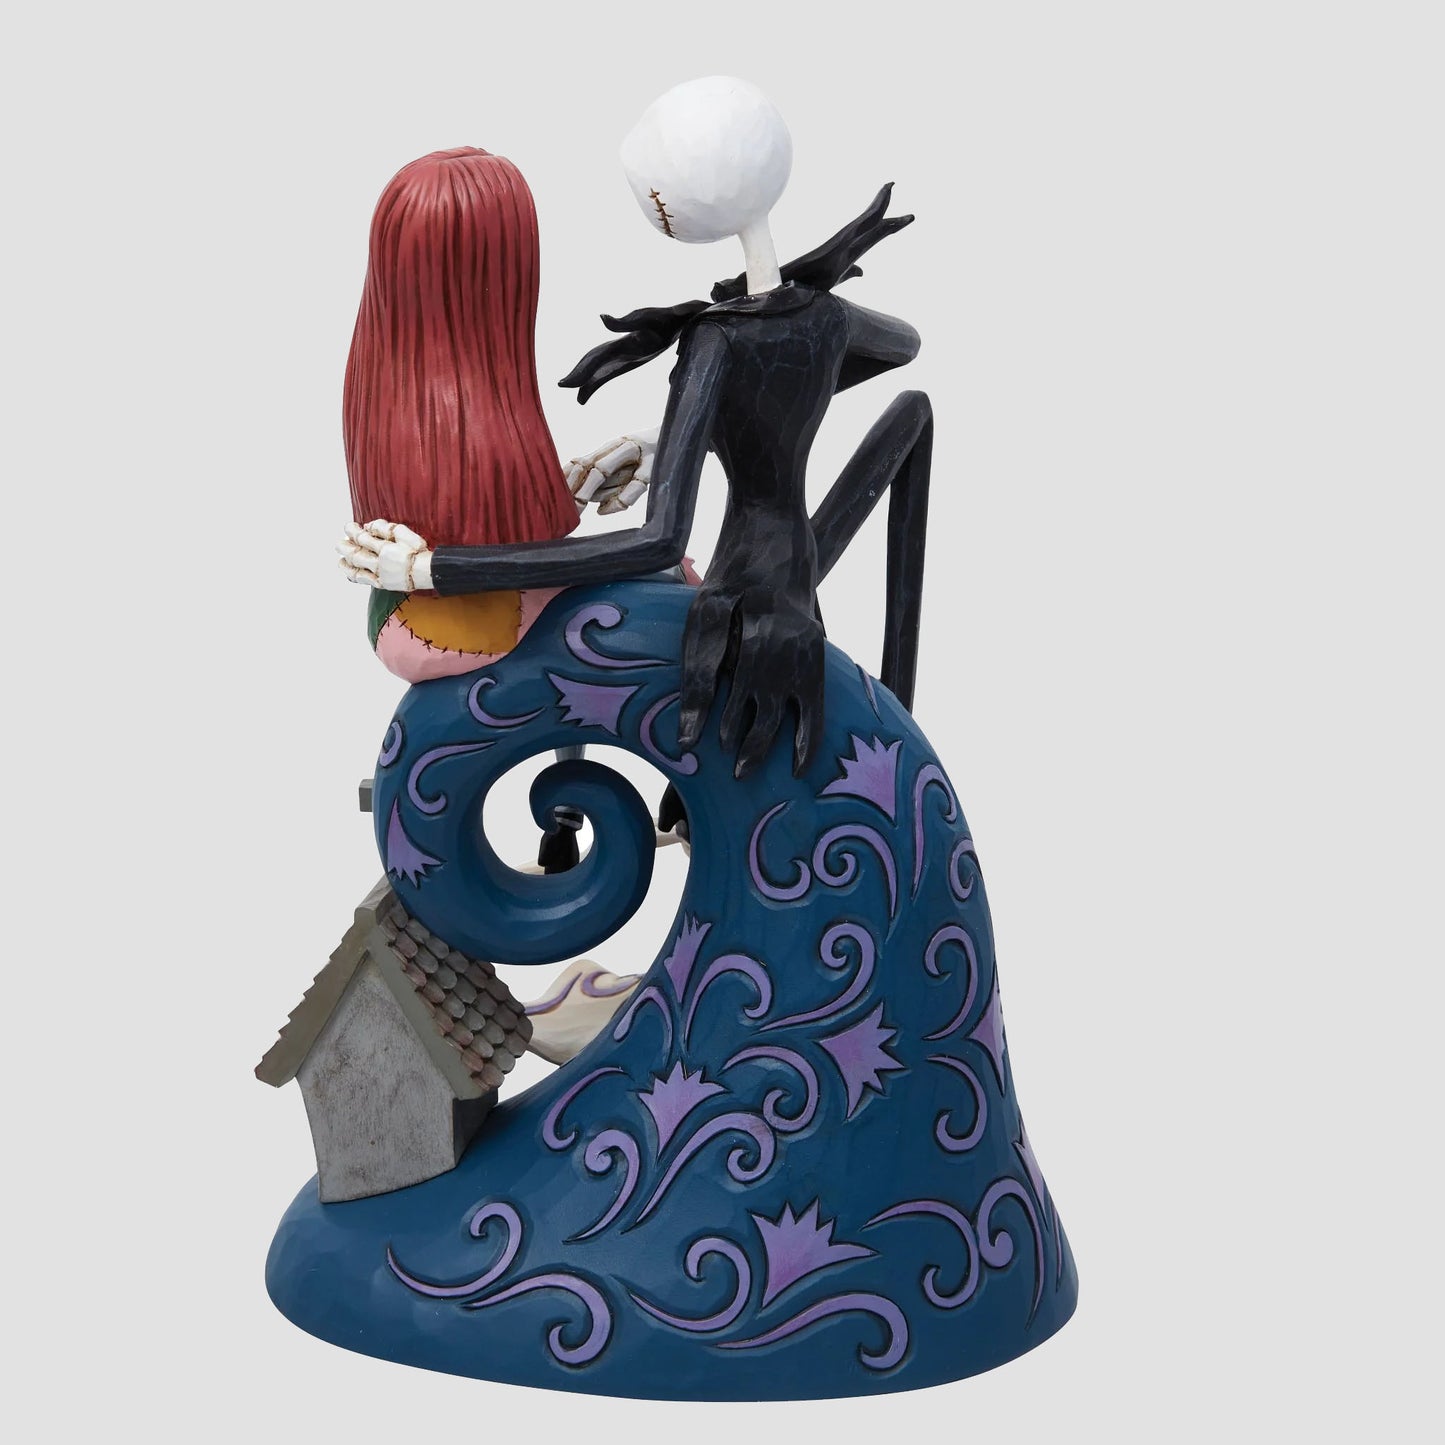 The Nightmare Before Christmas "Spiral Hill's Romance" Jim Shore Disney Traditions Statue